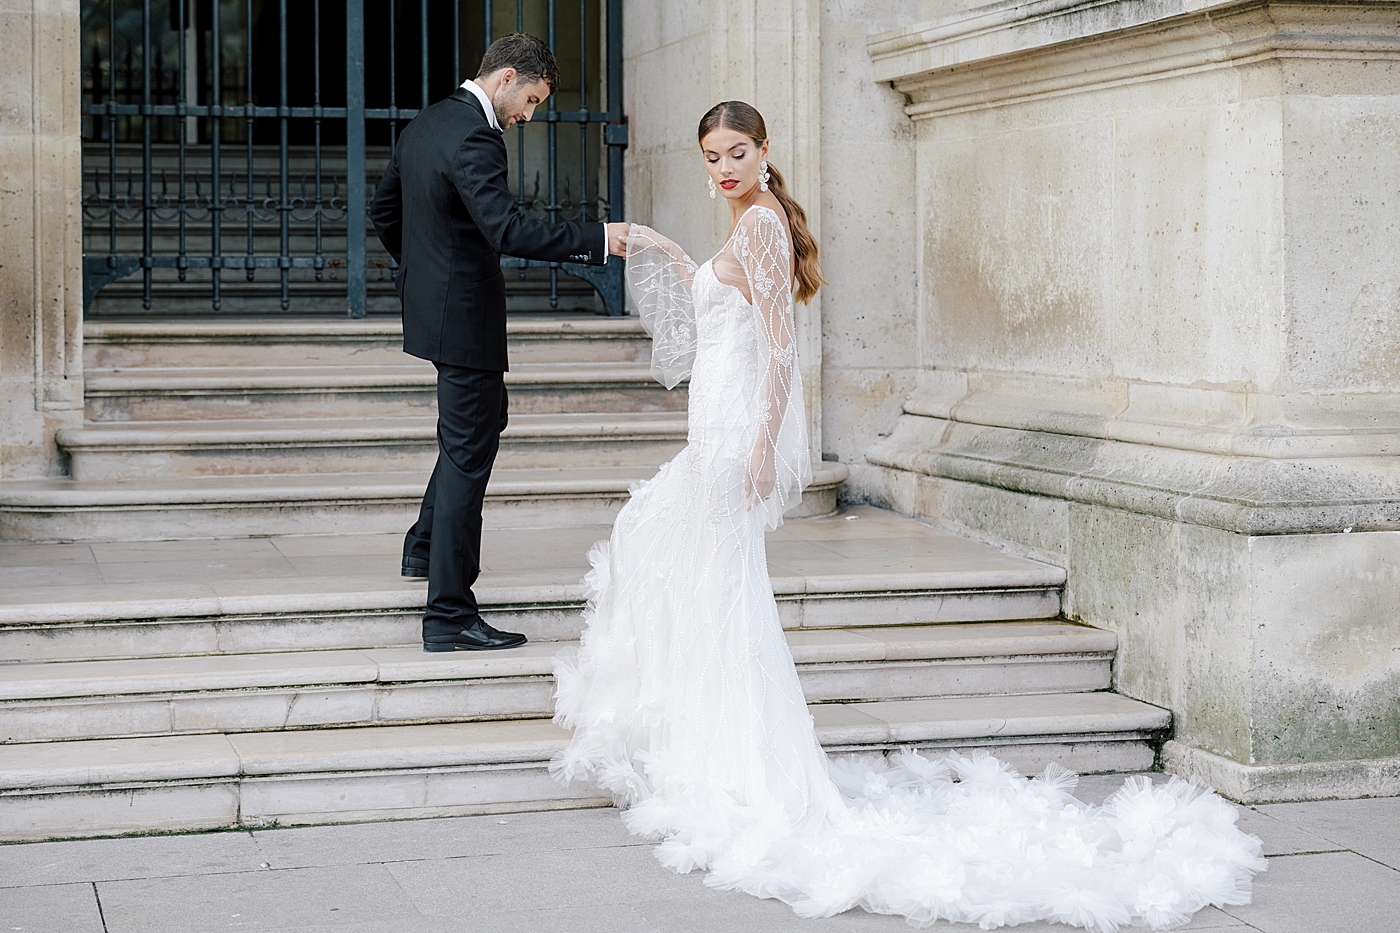 Groom leading his bride with a long, feathery train up concrete steps | Image by Hope Helmuth Photography